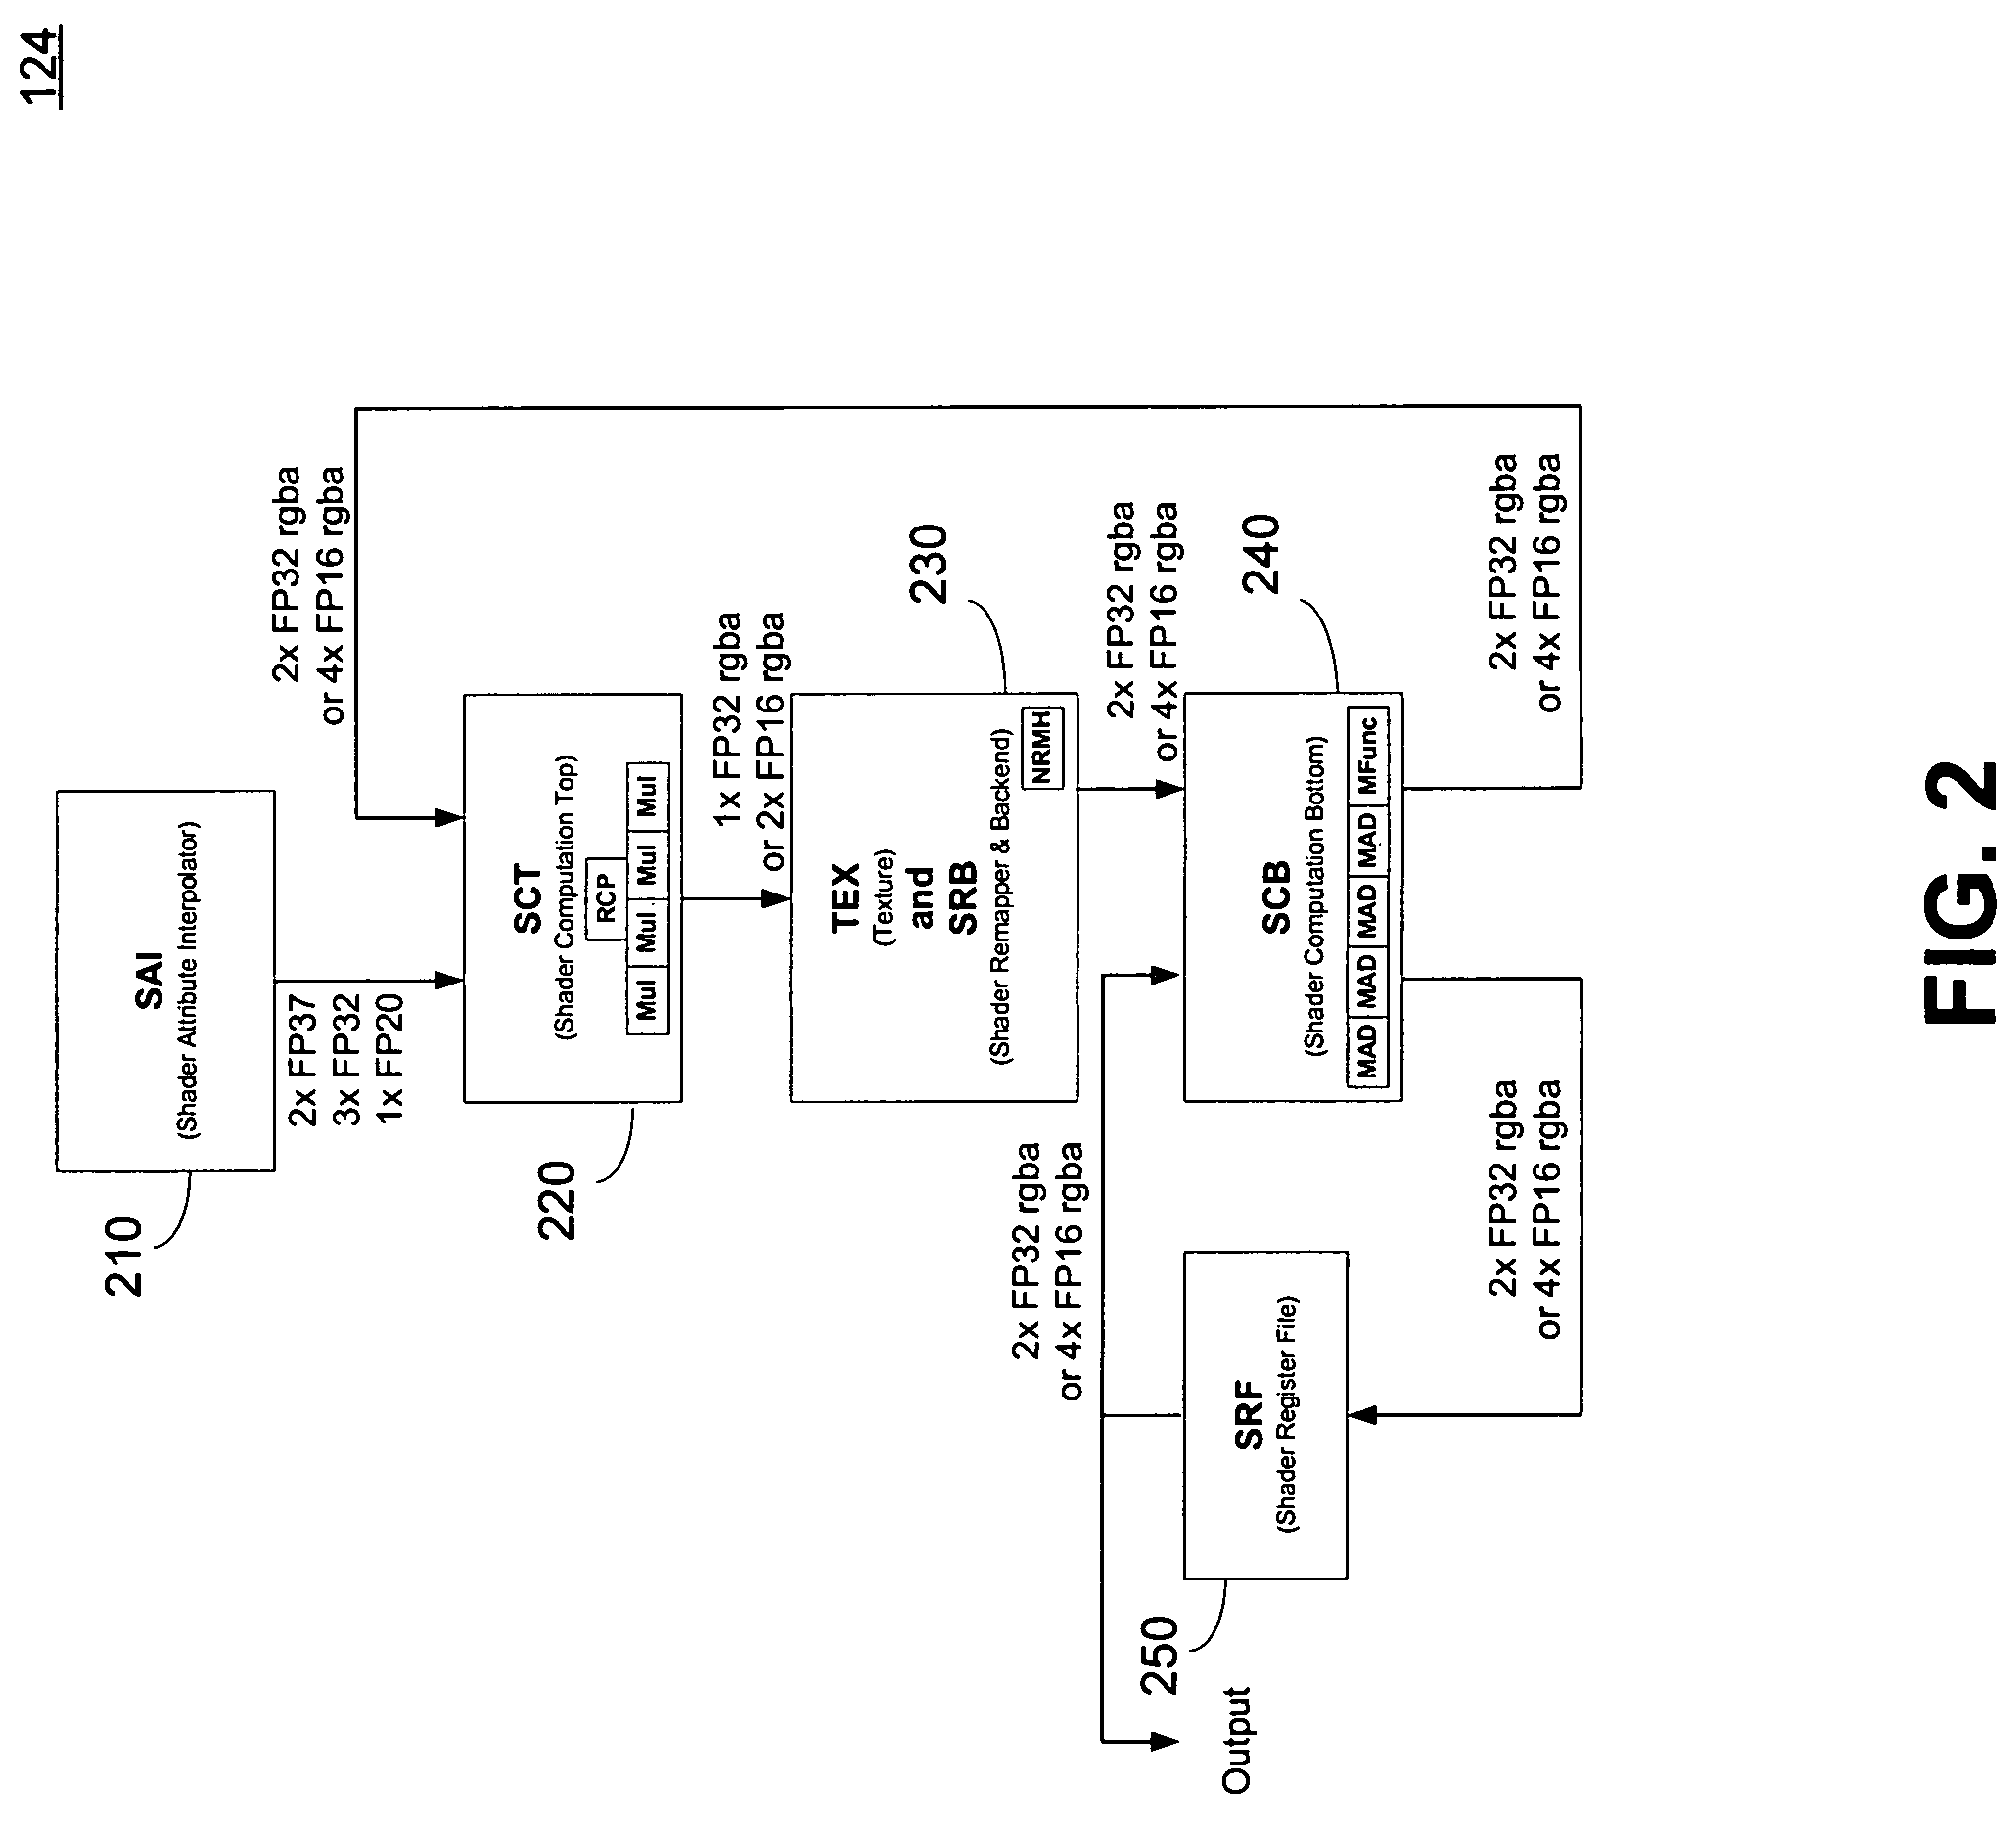 Method and apparatus for register allocation in presence of hardware constraints